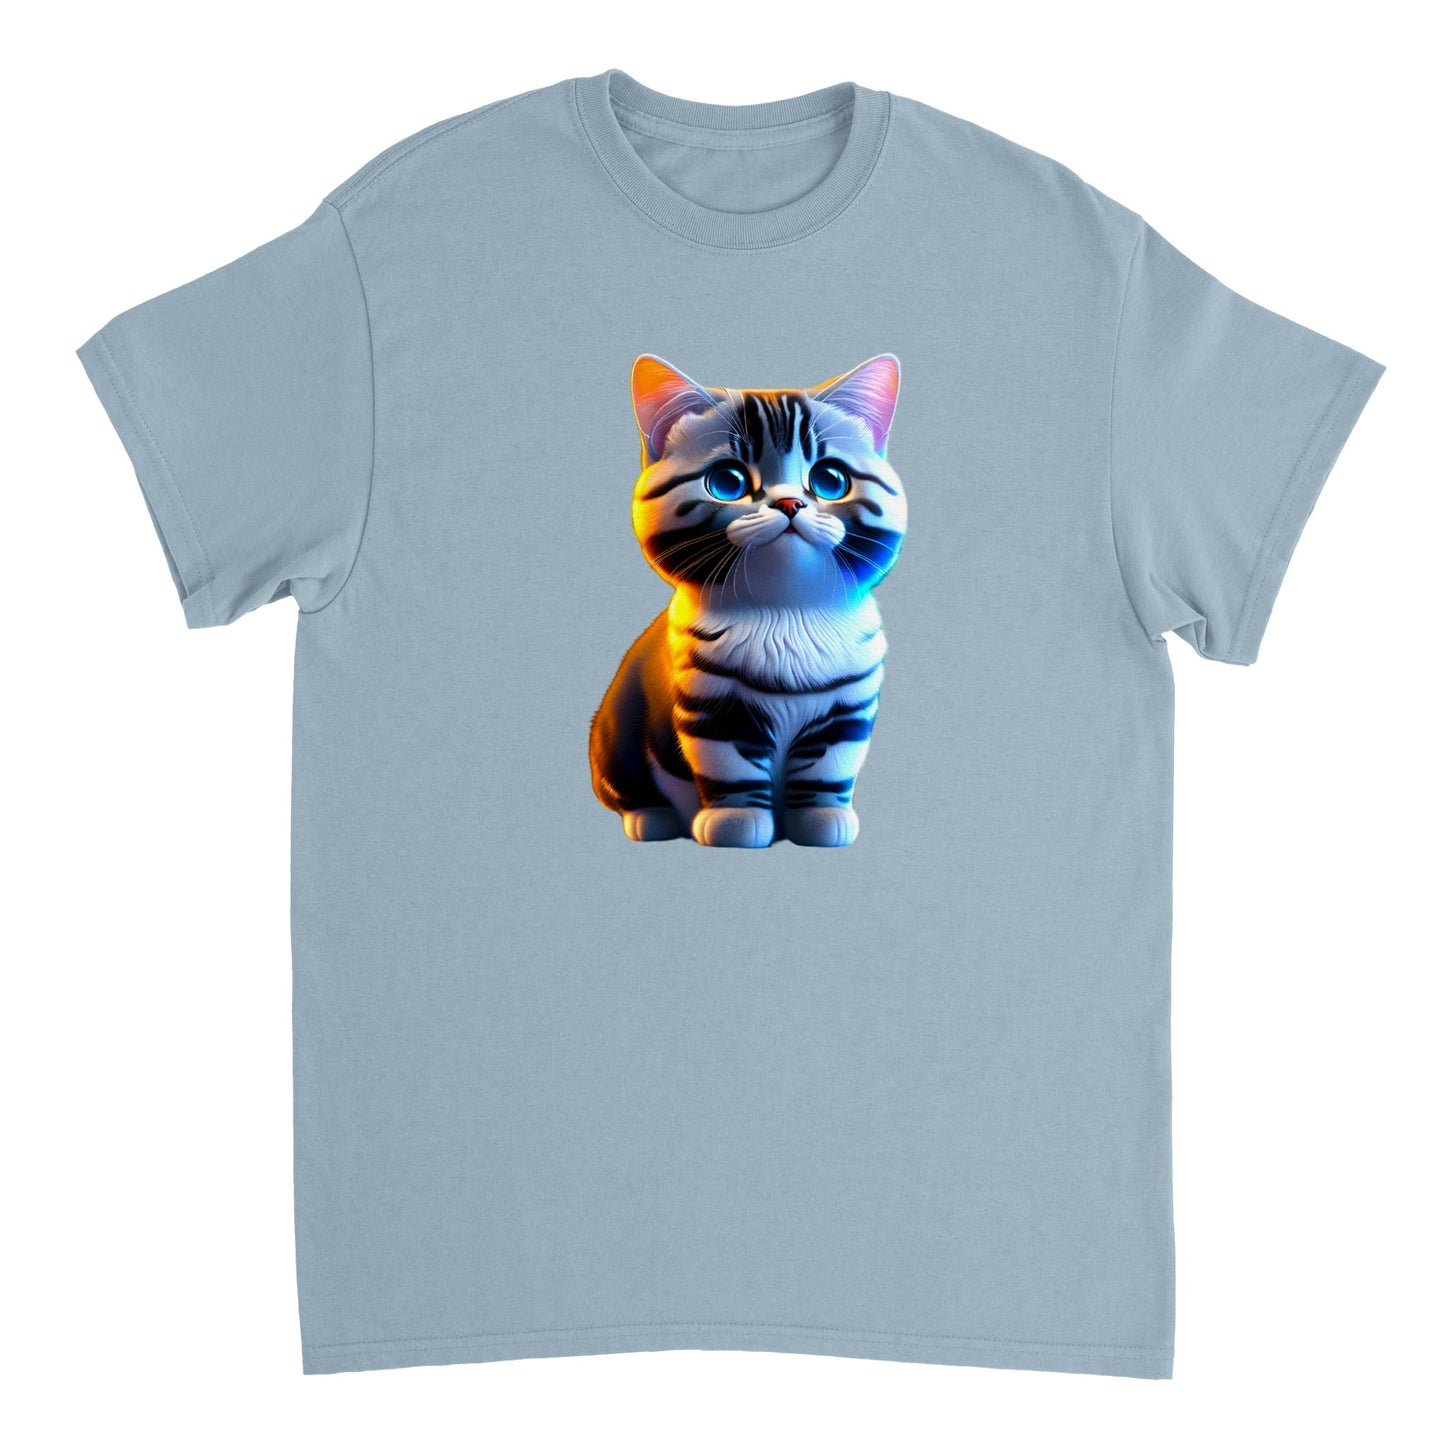 Adorable, Cool, Cute Cats and Kittens Toy - Heavyweight Unisex Crewneck T-shirt 28